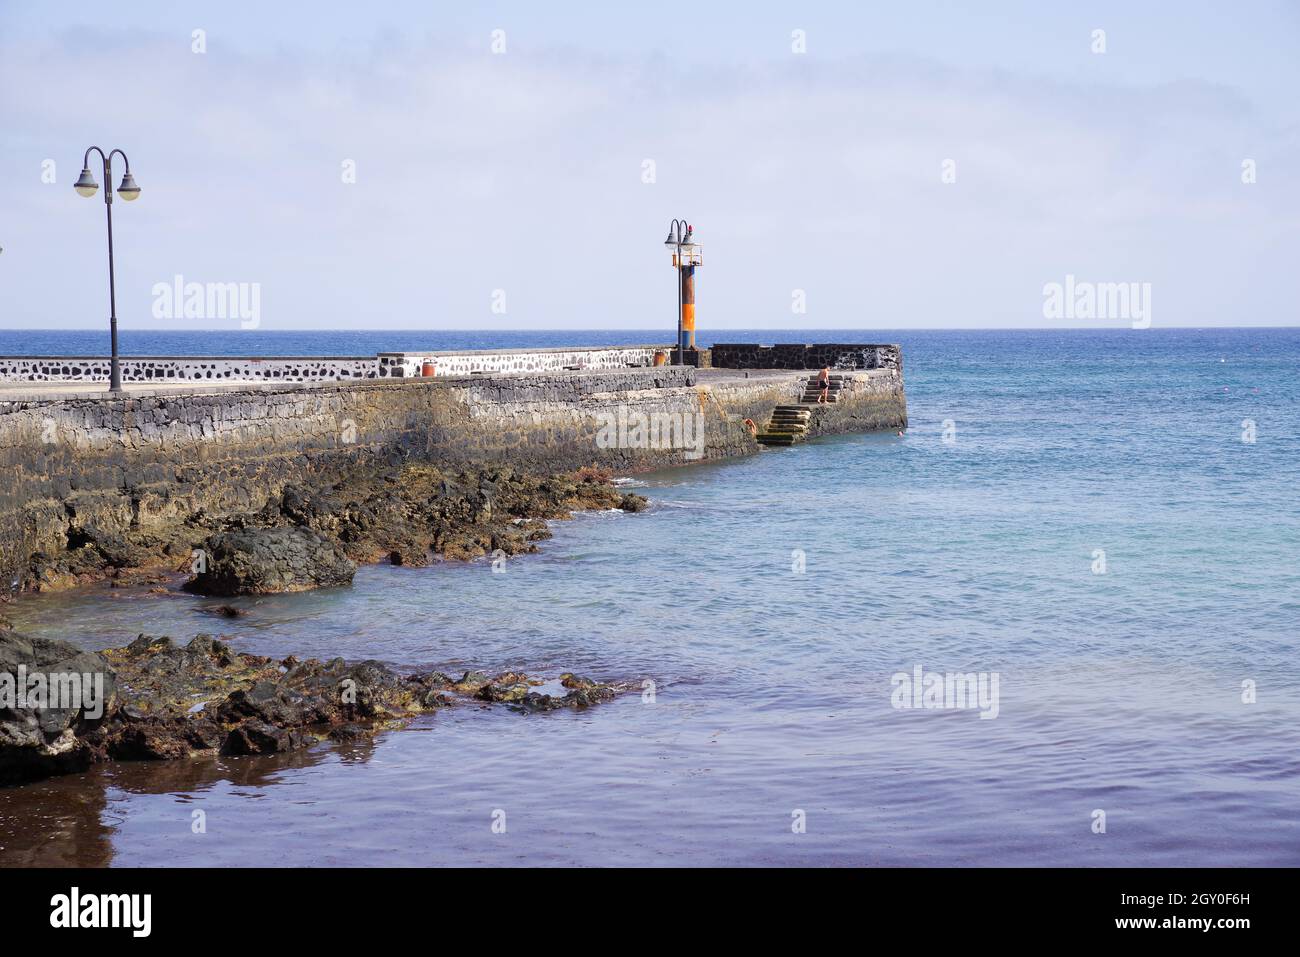 Jetty and seawall in Arrieta - northern Lanzarote, Canary Islands Stock Photo